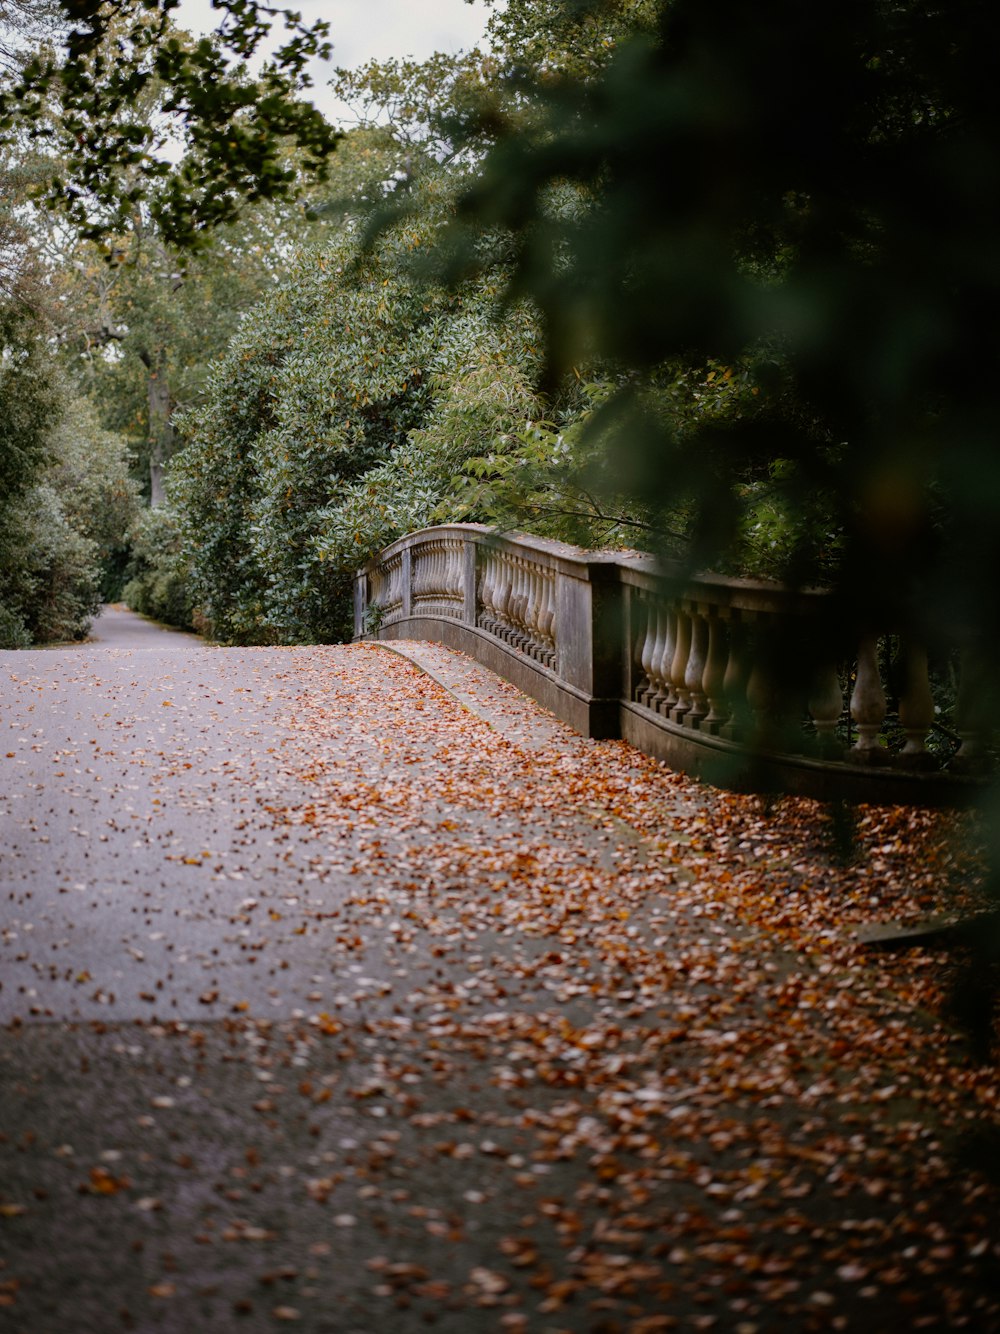 a bridge that has fallen leaves on the ground